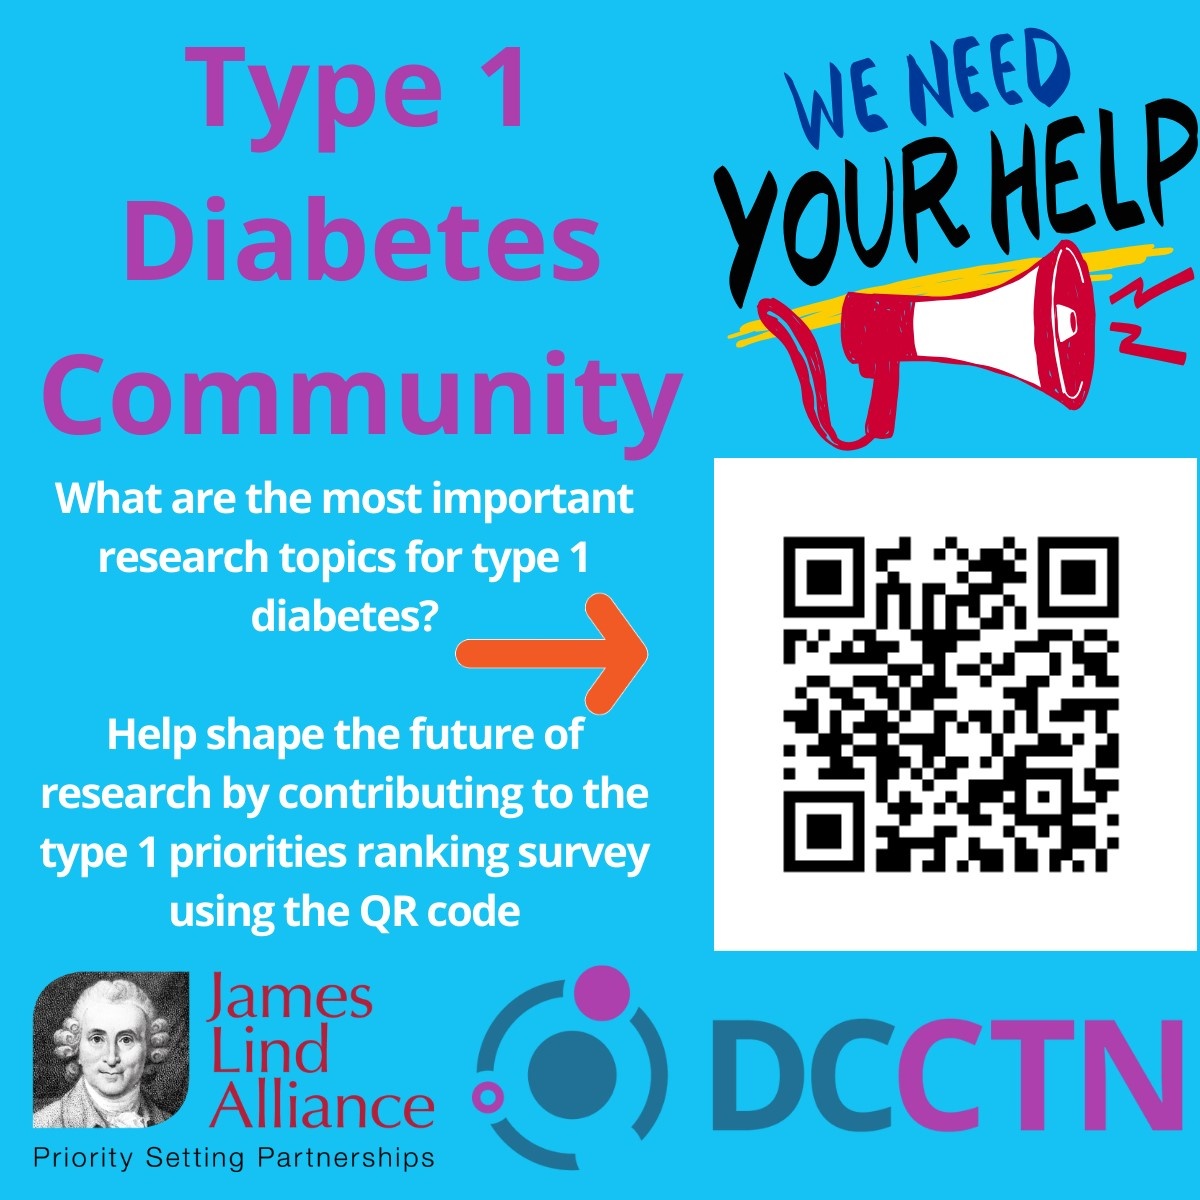 @LindAlliance invite you to share your views to shape the future of type 1 diabetes research. Scan the QR code to take their survey. #diabetes #research @boltoncarers @boltonhospice @cahn_uk @boltonnhsft @boltonhindus @THEBCOM1 @BoltonTogether @BoltonChampions @PrecGems